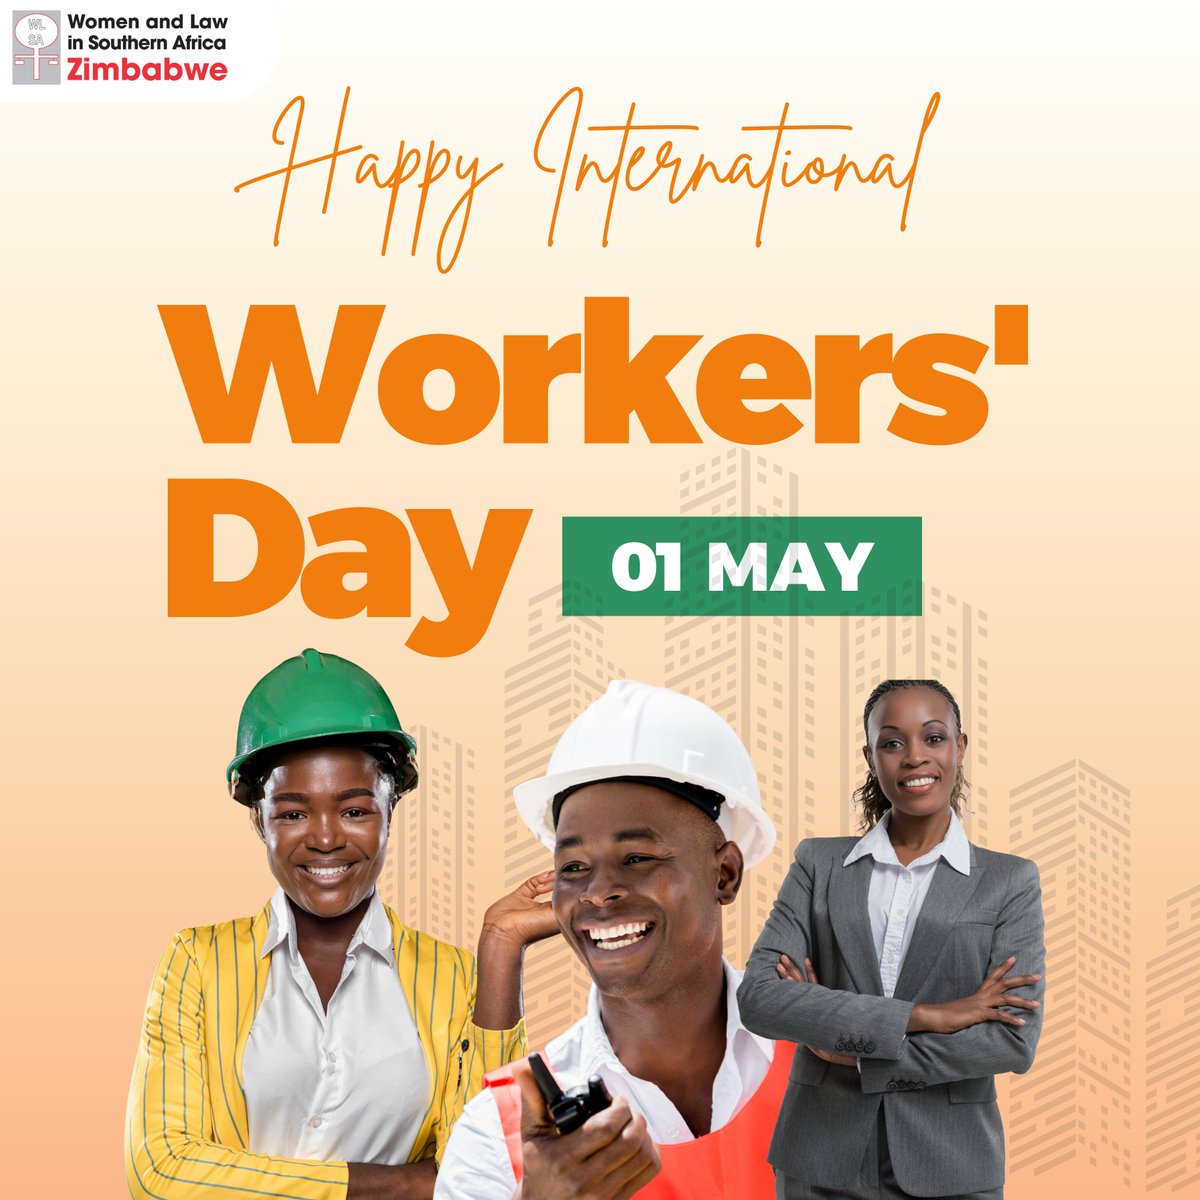 As we join the world🌍in commemorating Workers Day, WLSA calls for safe workspaces for women and an end to workplace sexual harassment. Let's advance social justice and promote decent work for all. #SocialJustice #DecentWork